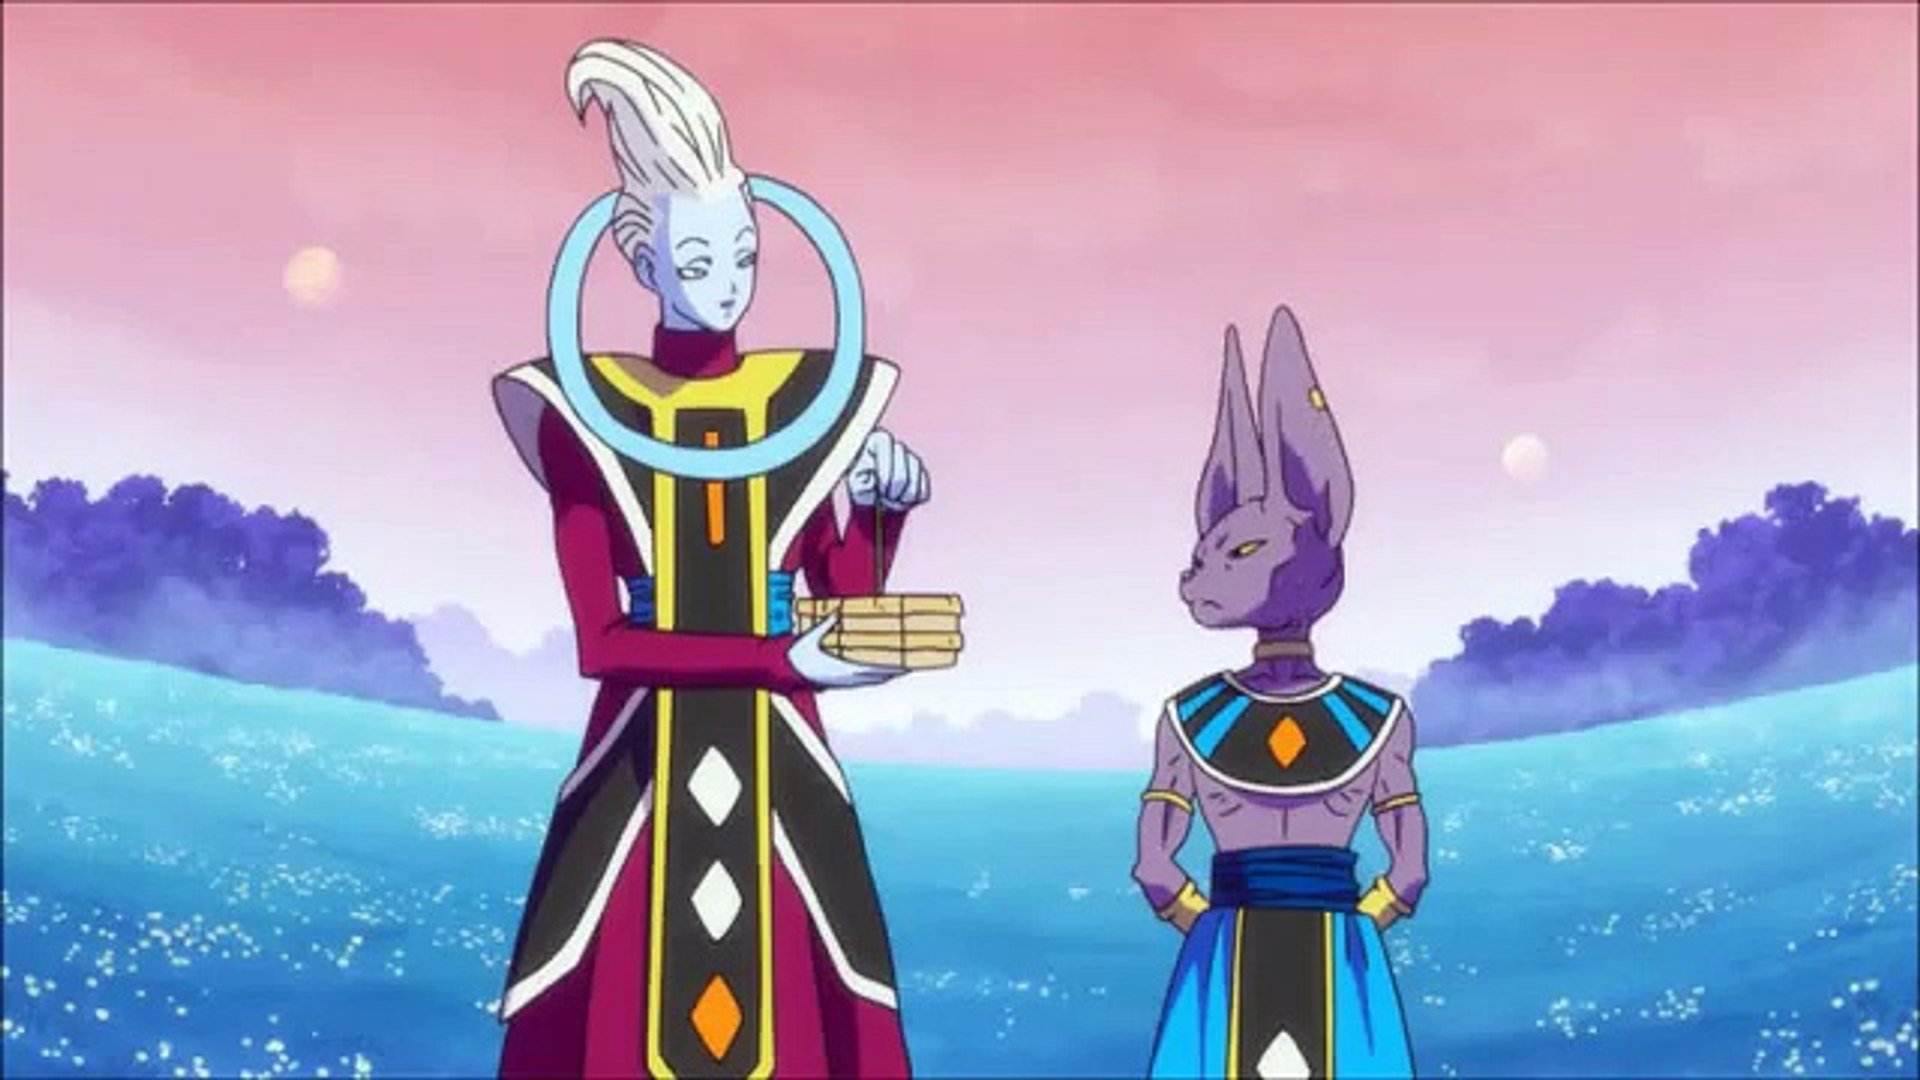 Dragon Ball Z Whis Vs Beerus Fight Video Dailymotion